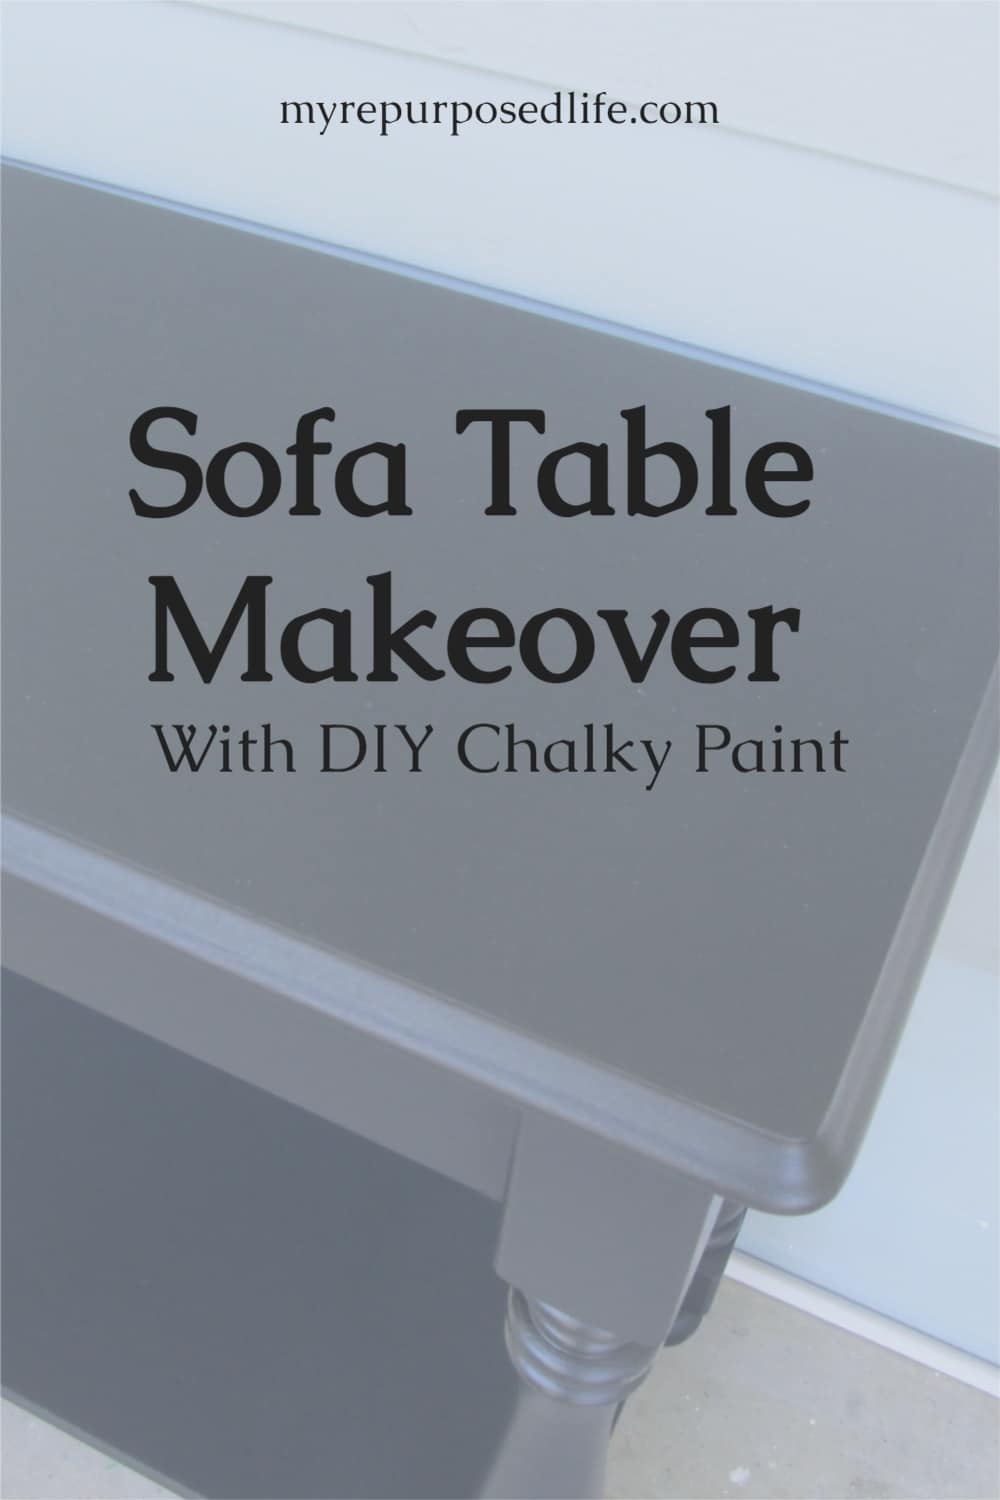 Tips on how to give a tired old sofa table a new look using DIY chalky paint. How to get the smoothest finish ever! Great tips for furniture flippers! #MyRepurposedLife via @repurposedlife